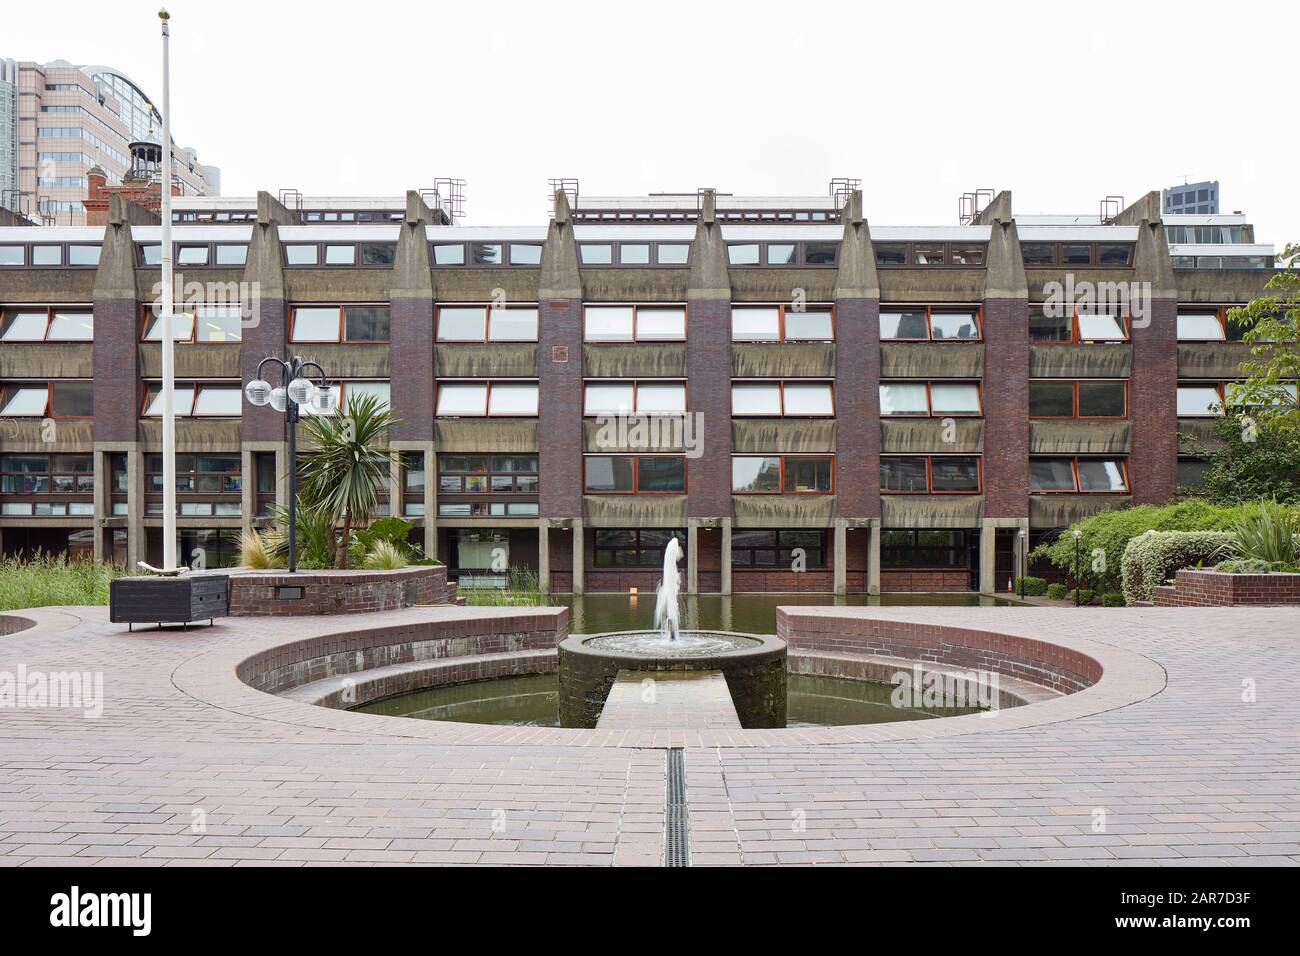 Courtyard with water features and opposite apartment terraces. Barbican Estate, London, United Kingdom. Architect: Chamberlin, Powell and Bon, 1969. Stock Photo